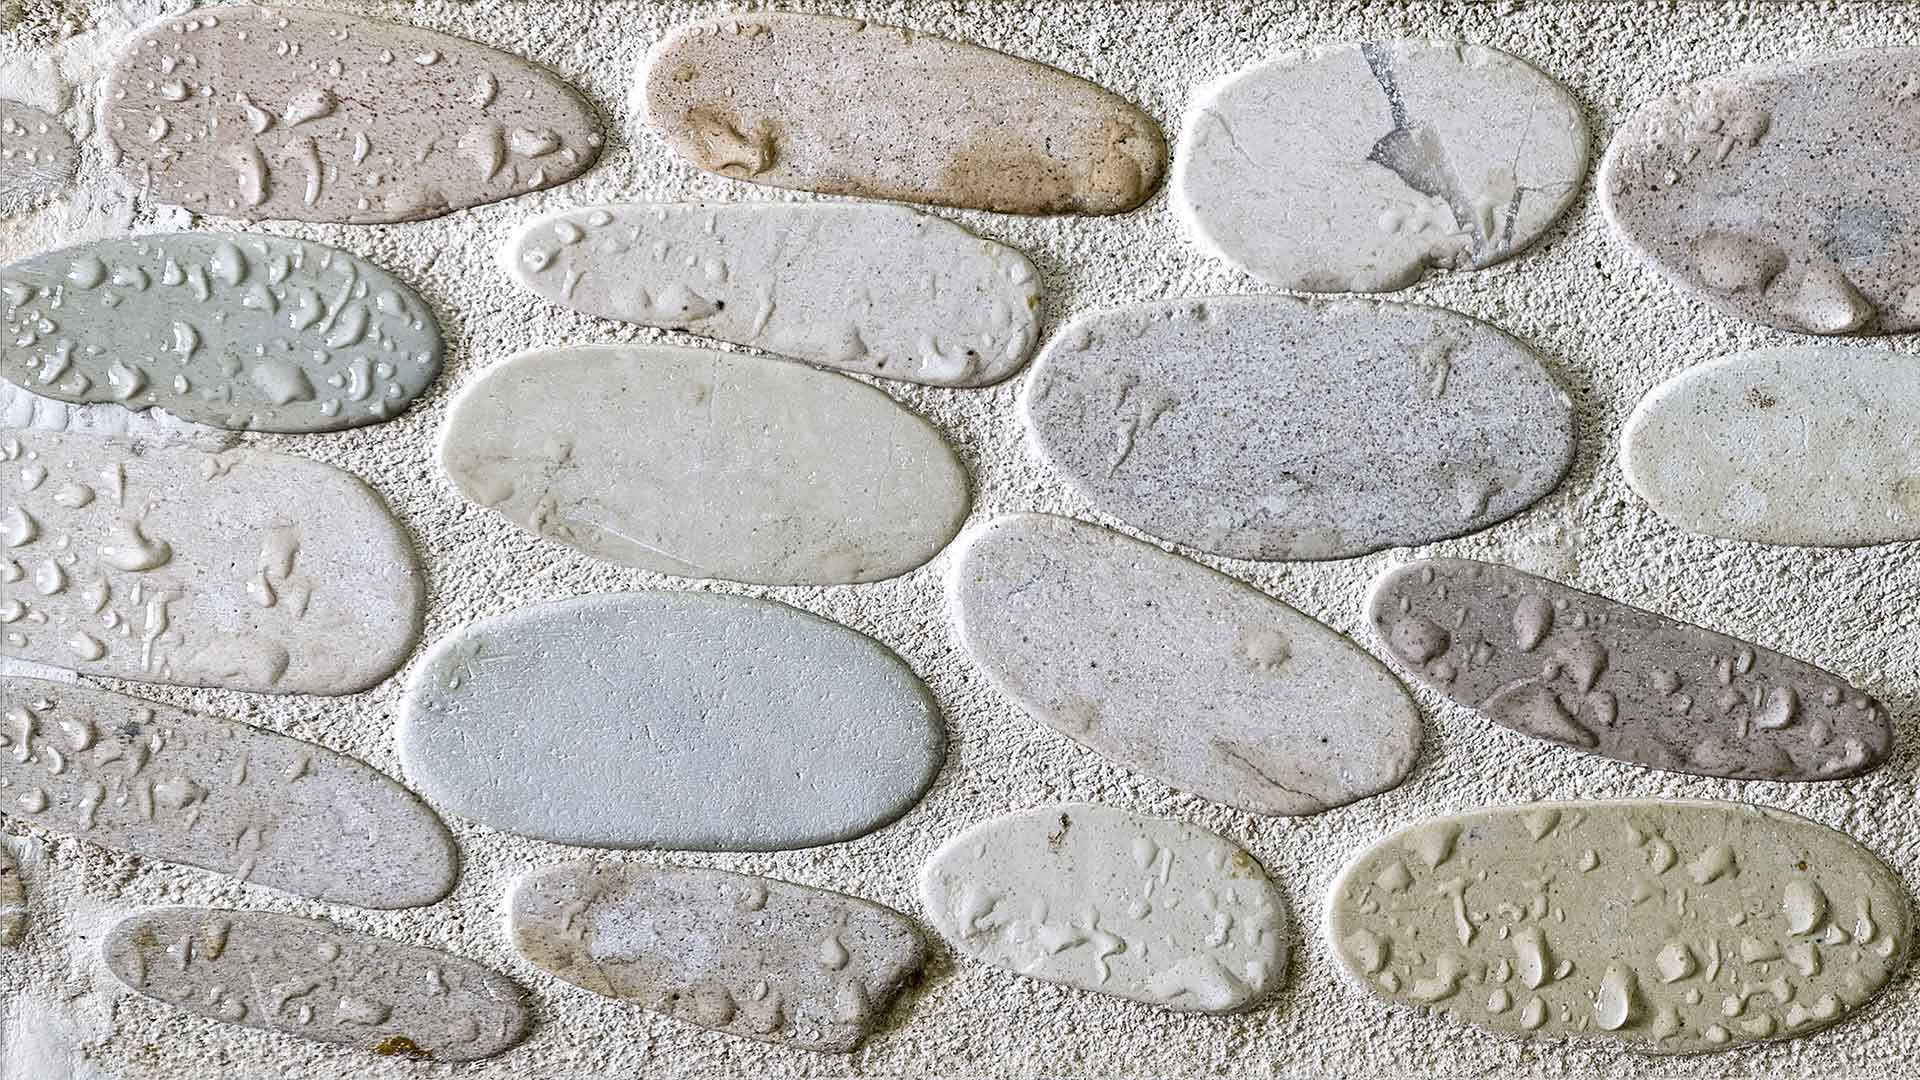 The Best Grout For Your Pebble Shower, Is A Pebble Shower Floor Good Idea